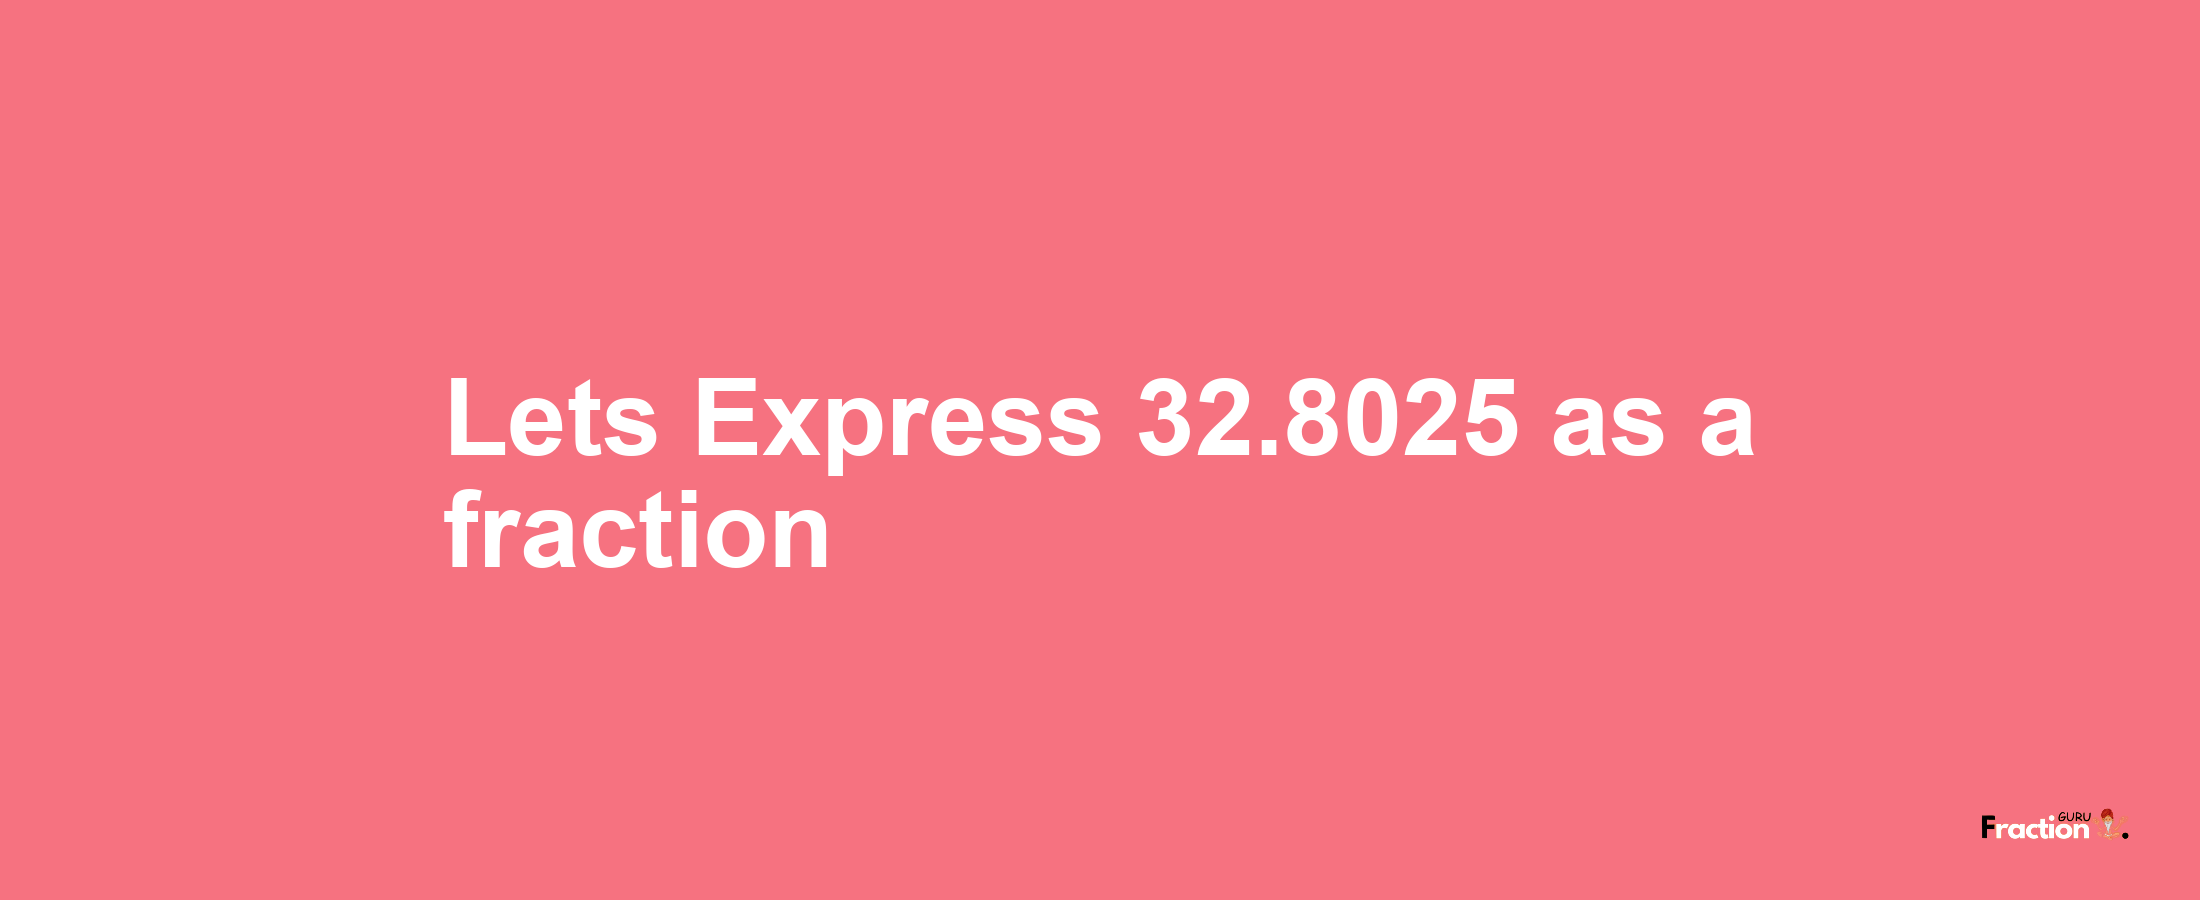 Lets Express 32.8025 as afraction